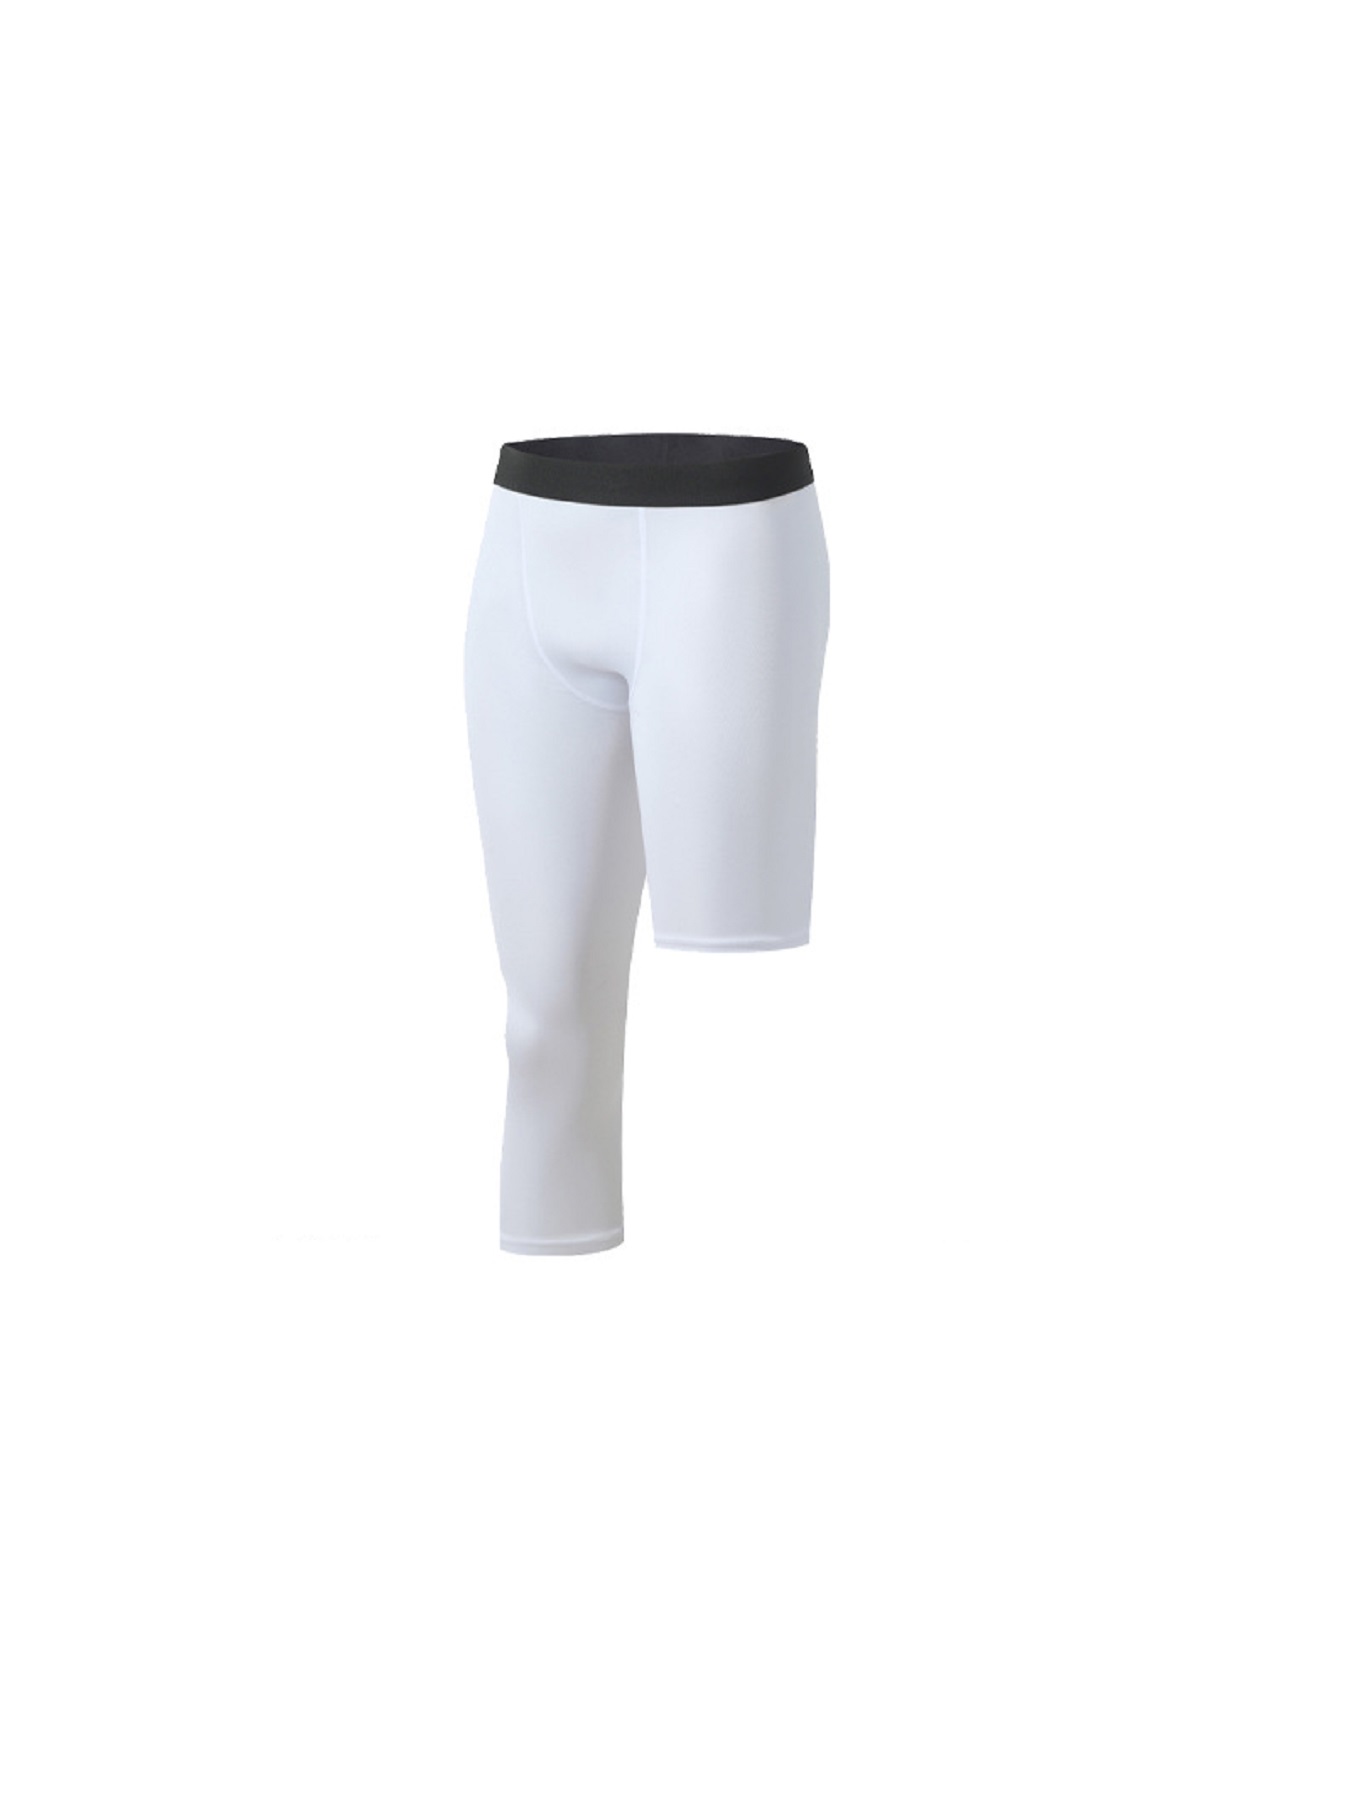 Men's 3/4 Compression Pants One Leg Tights Athletic Base Layer